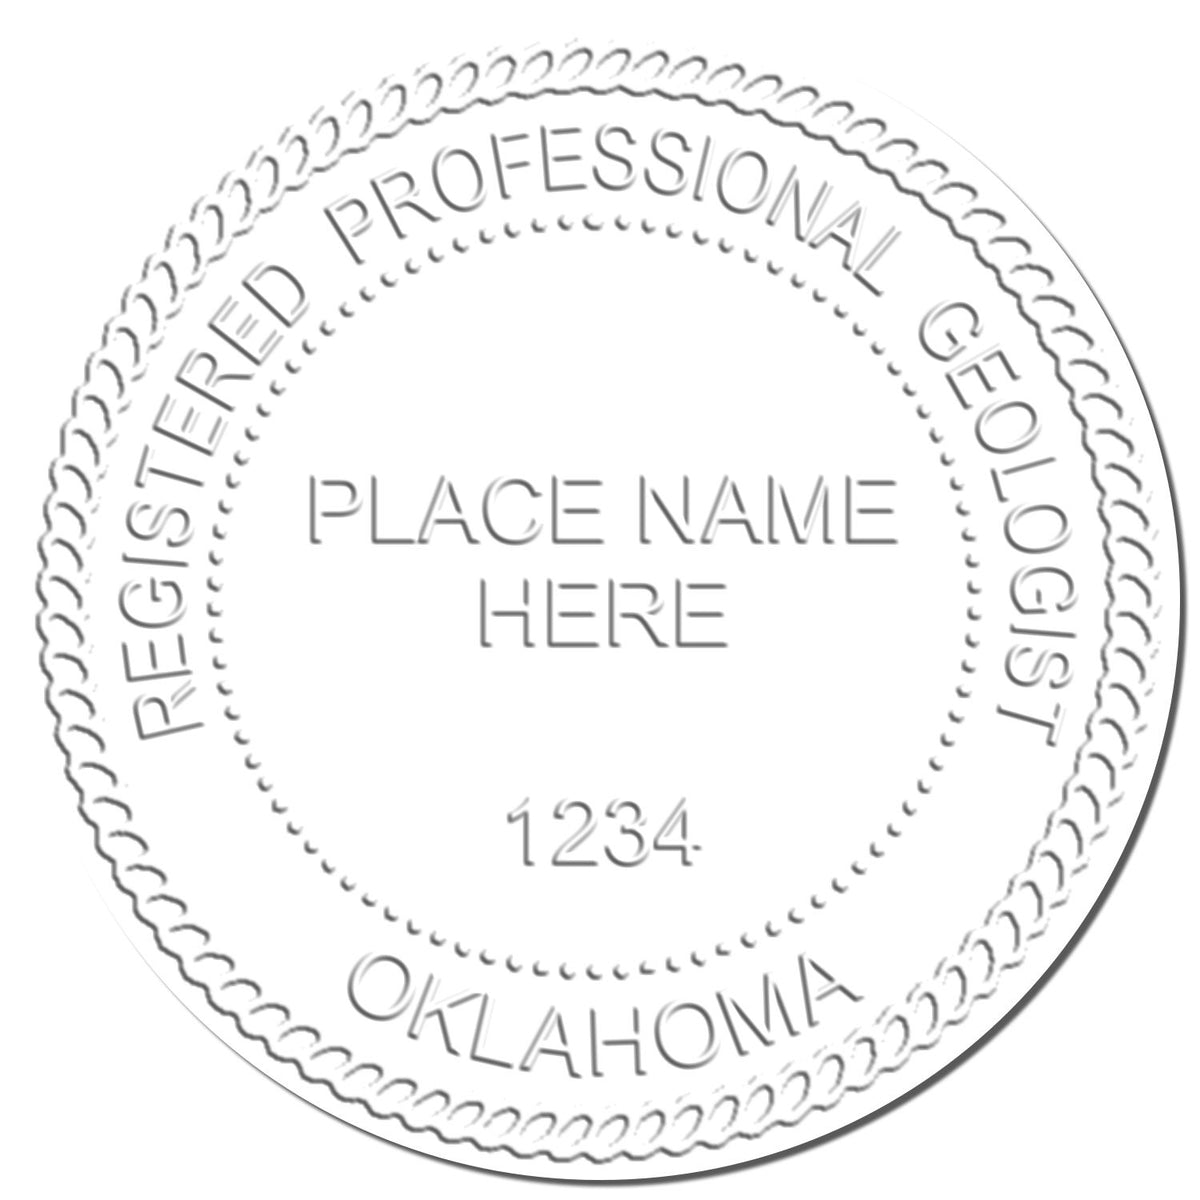 A photograph of the State of Oklahoma Extended Long Reach Geologist Seal stamp impression reveals a vivid, professional image of the on paper.